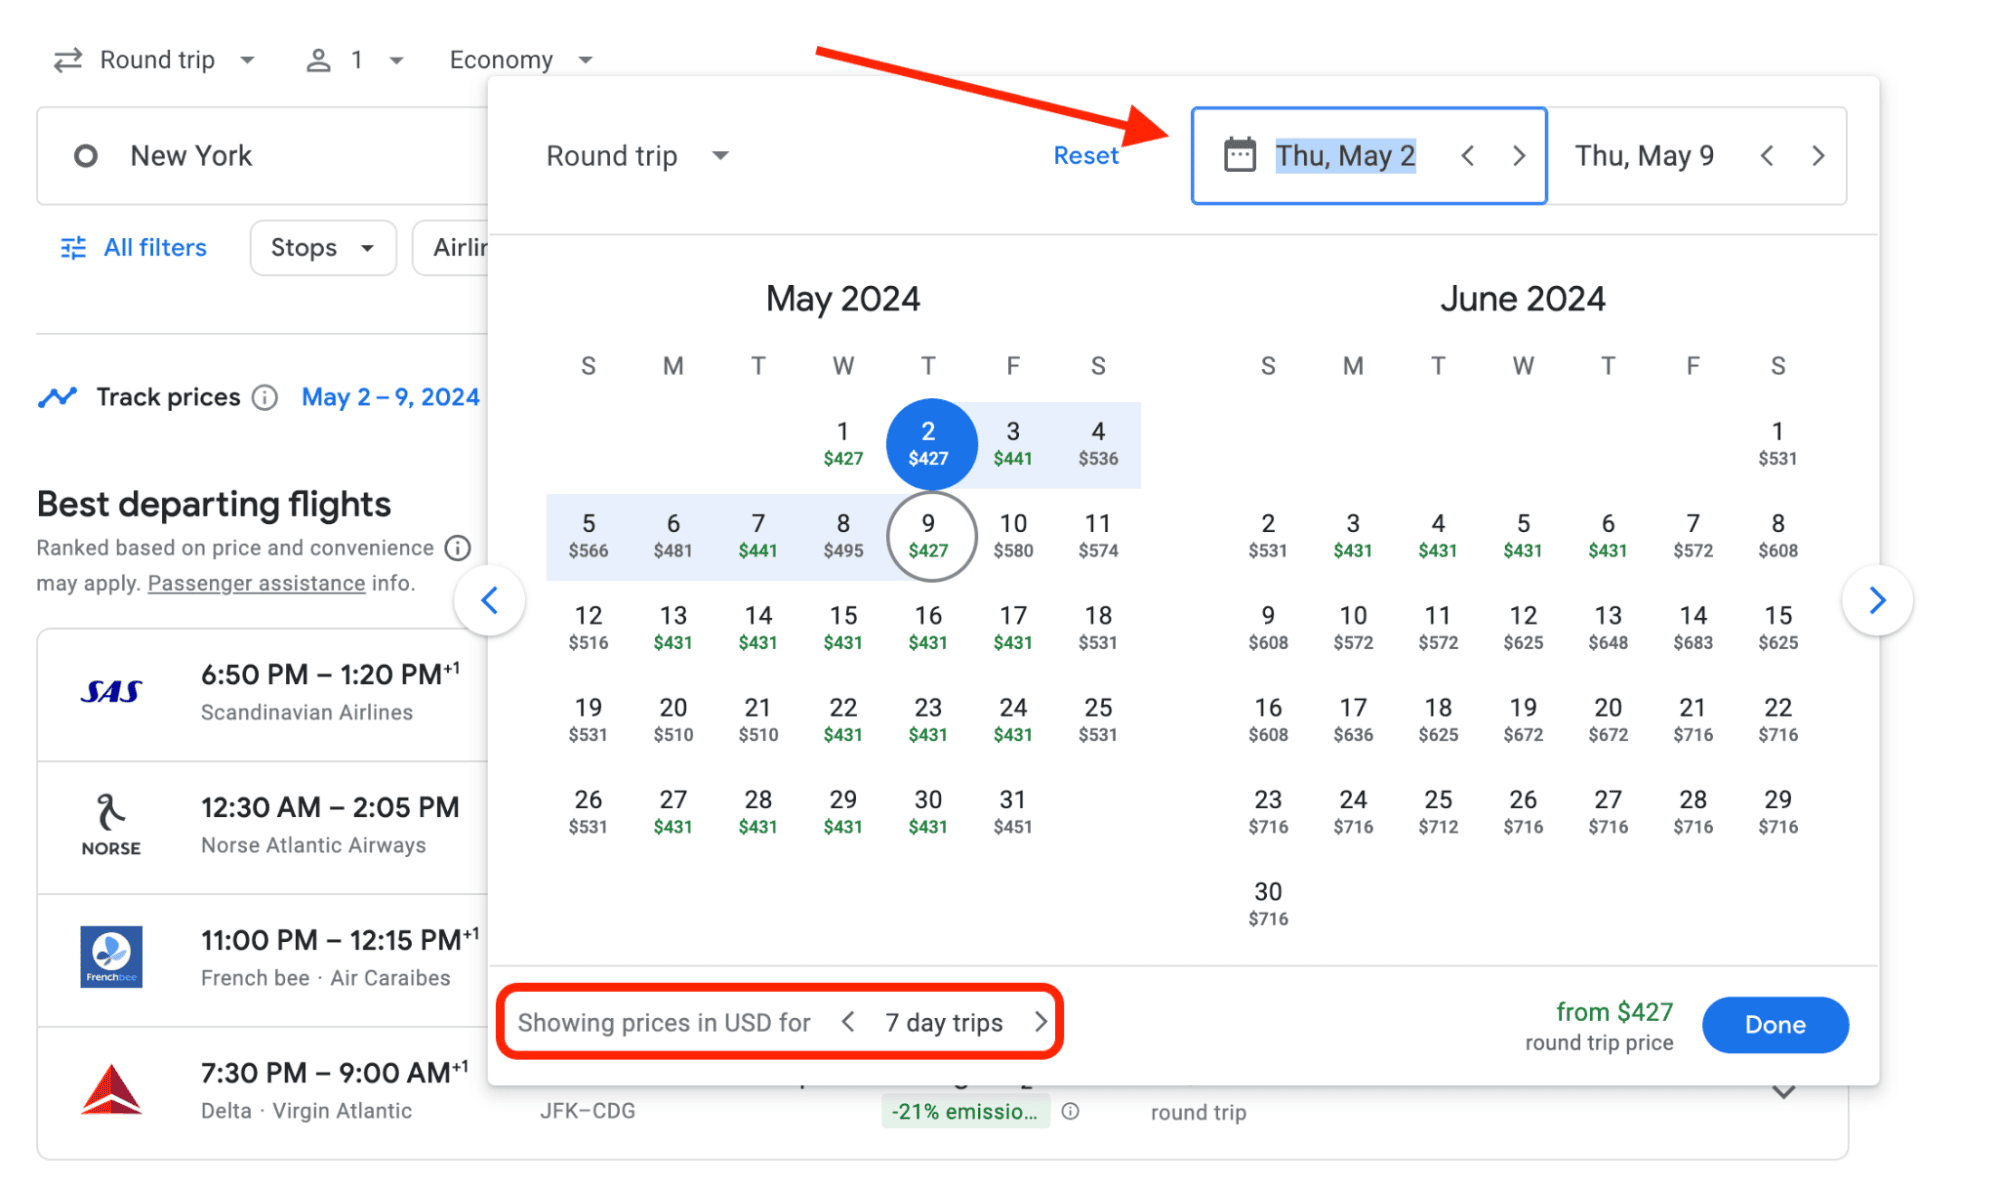 Example of Google Flights search